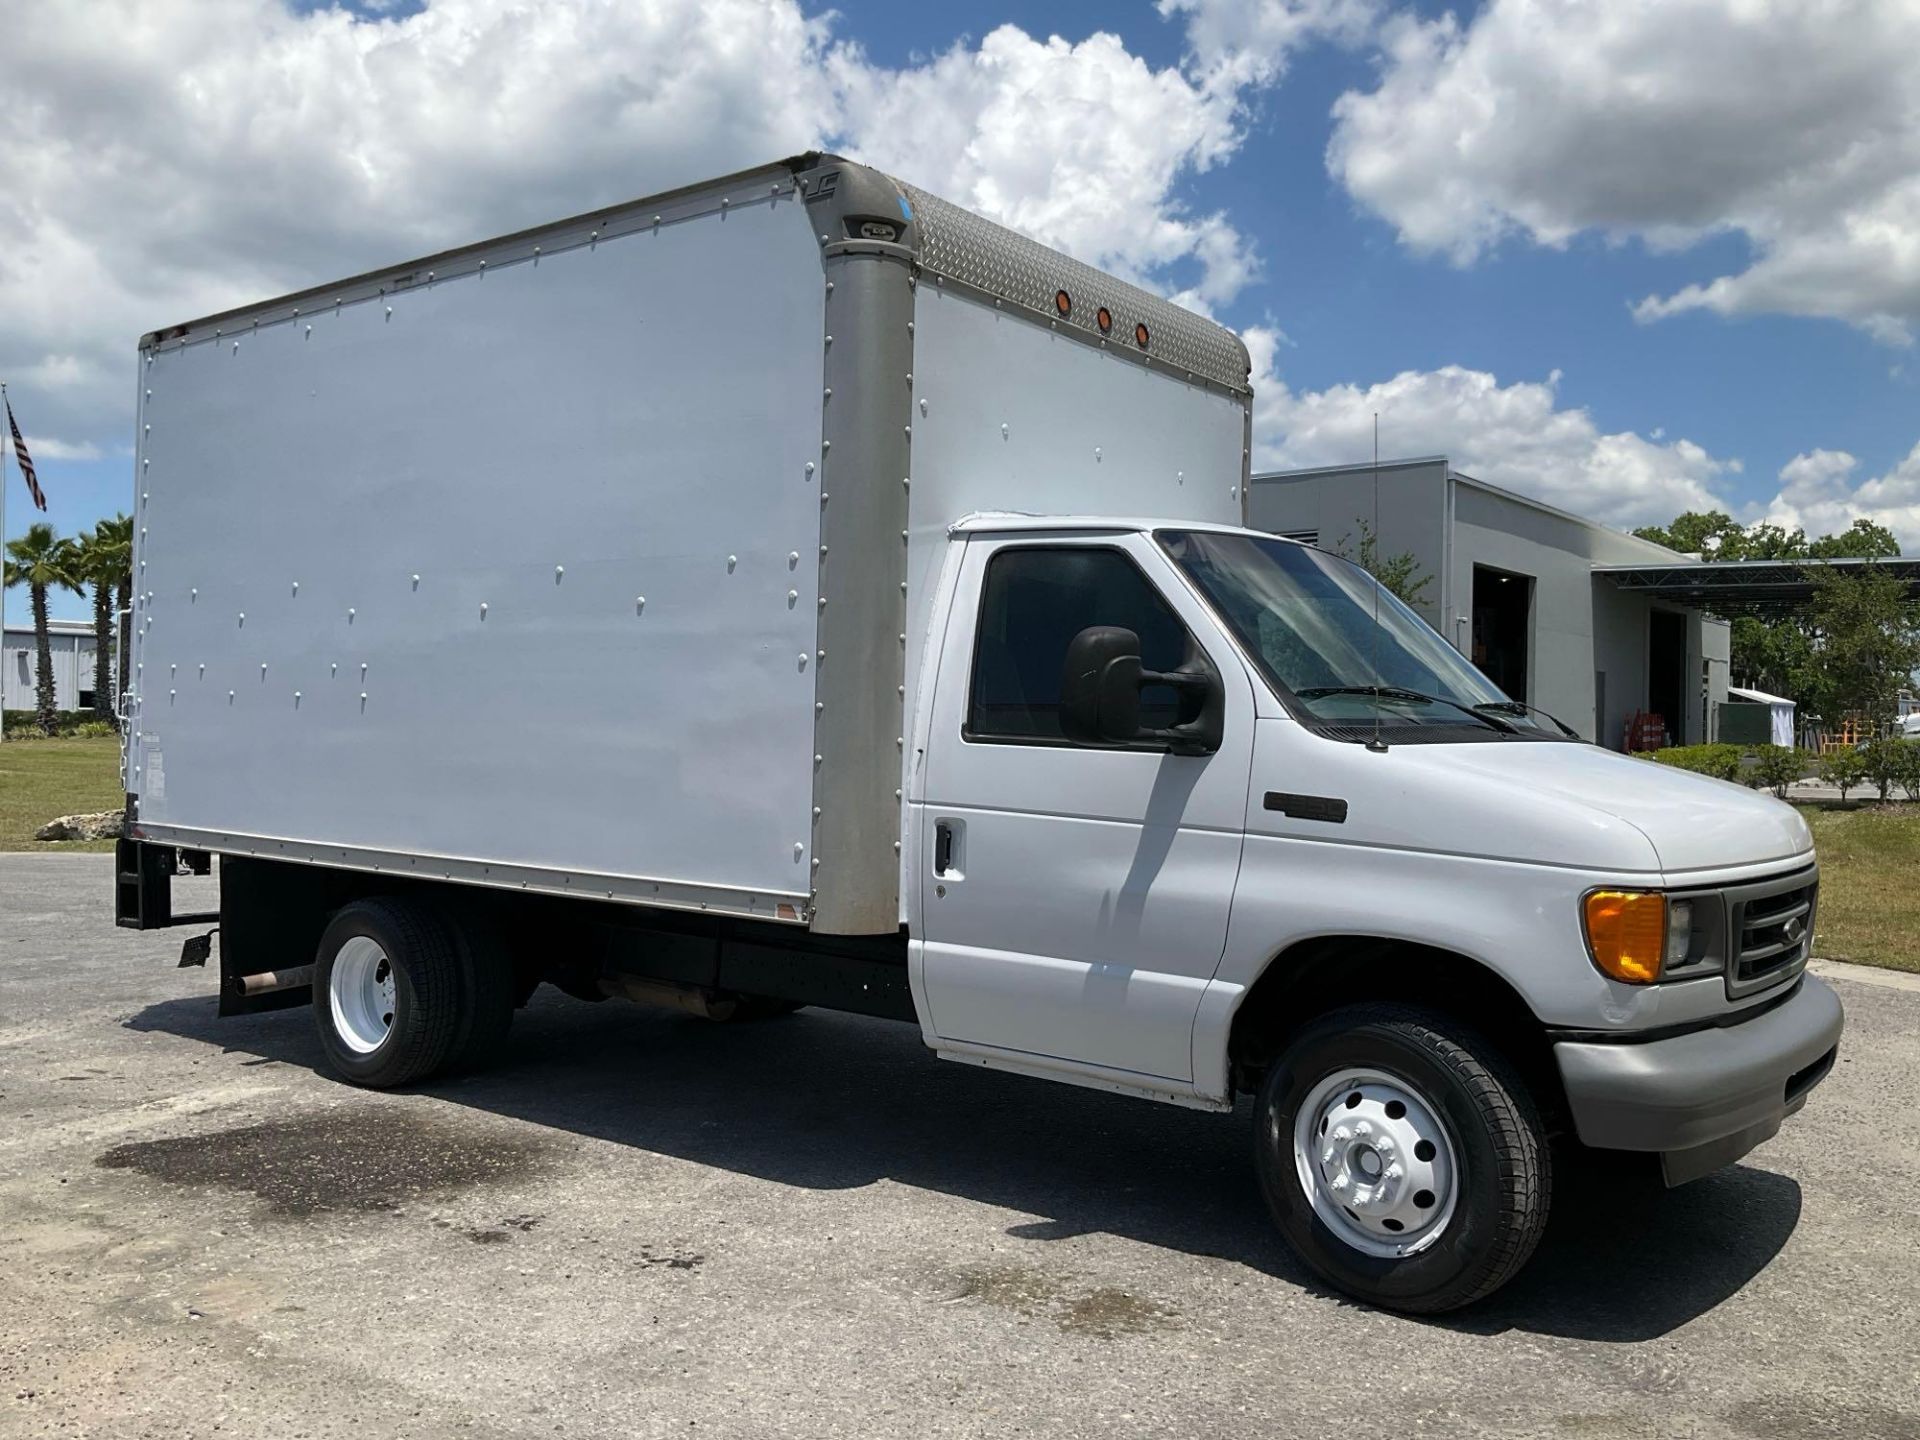 2003 FORD E-SERIES E350 CUTAWAY VAN, GAS AUTOMATIC, GVWR 11500LBS, LIFTGATE, ETRACKS, STORAGE...S... - Image 7 of 19